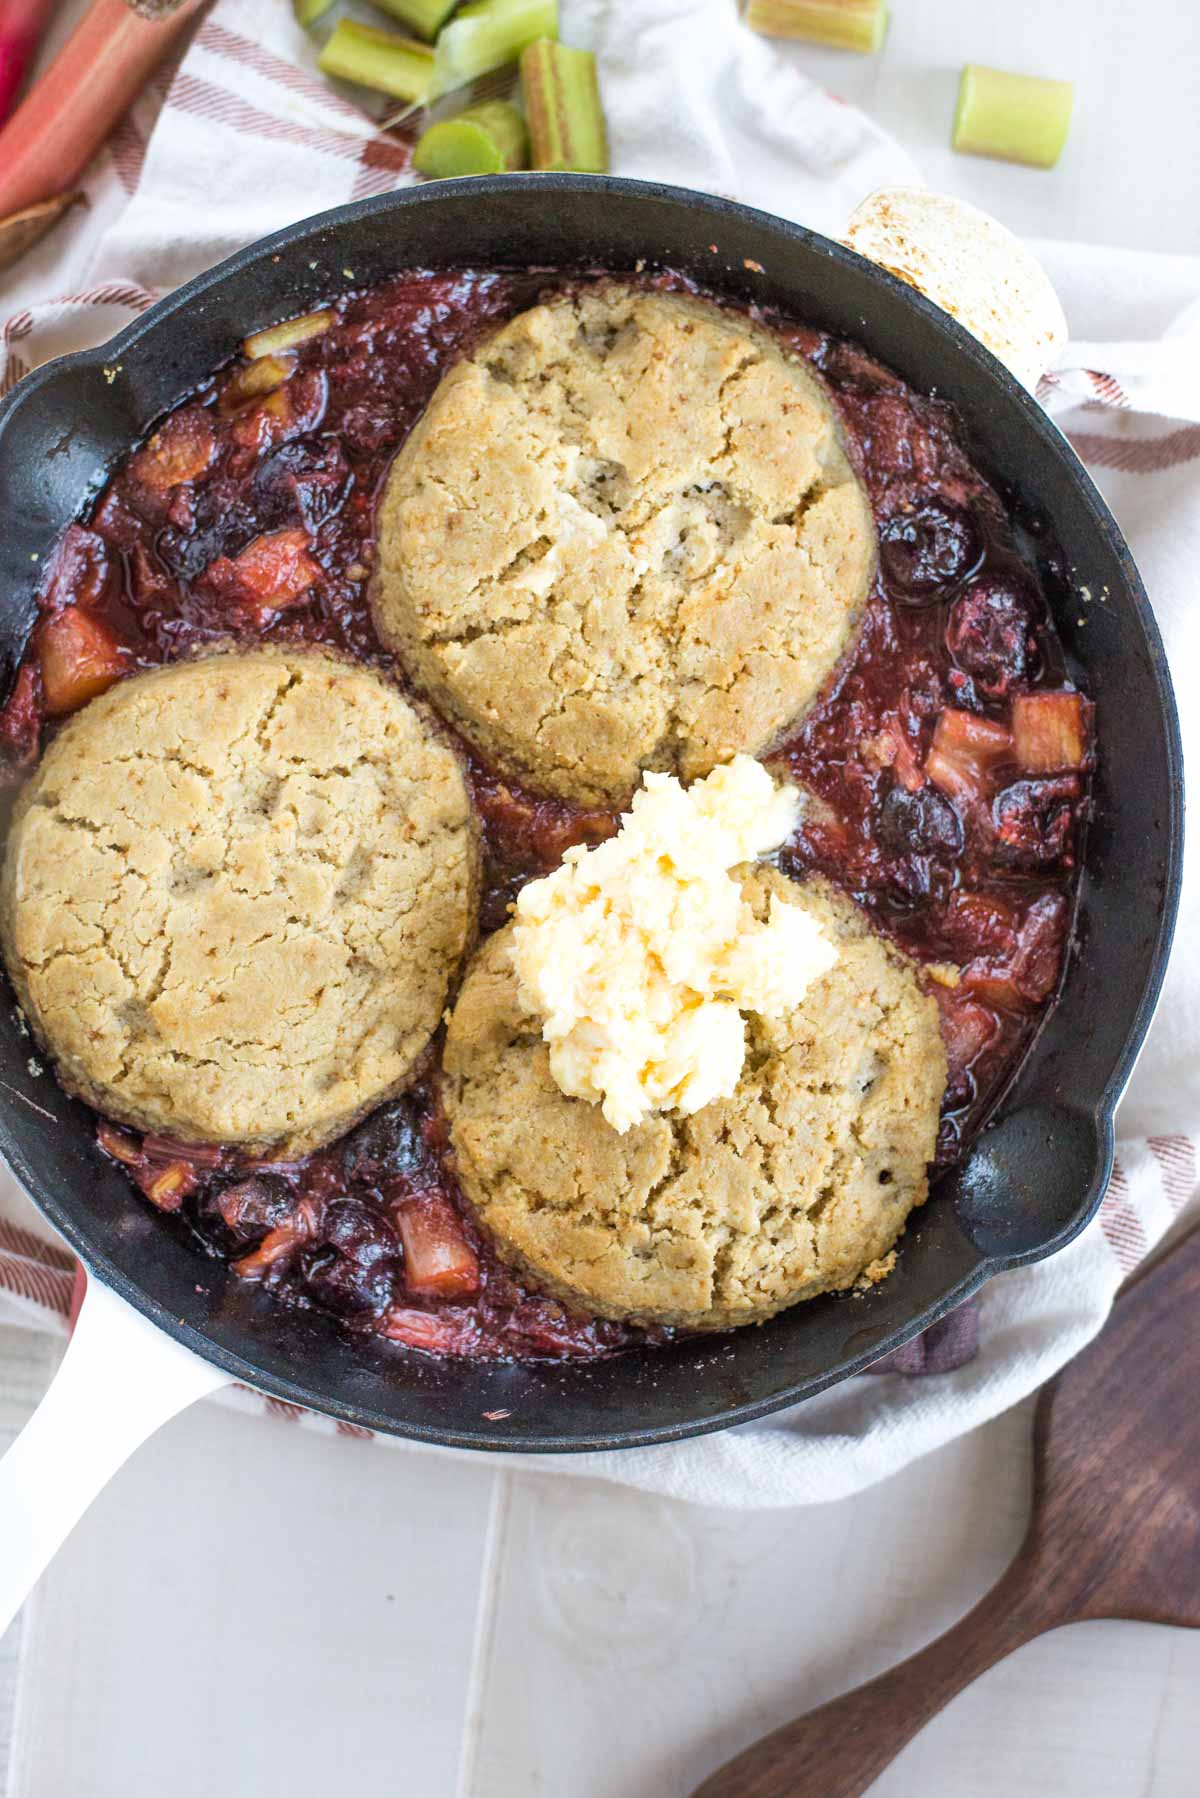 Looking for something delicious? Try this, it's the best cherry rhubarb cobbler with honey buttered biscuits. Seriously it's that good. 